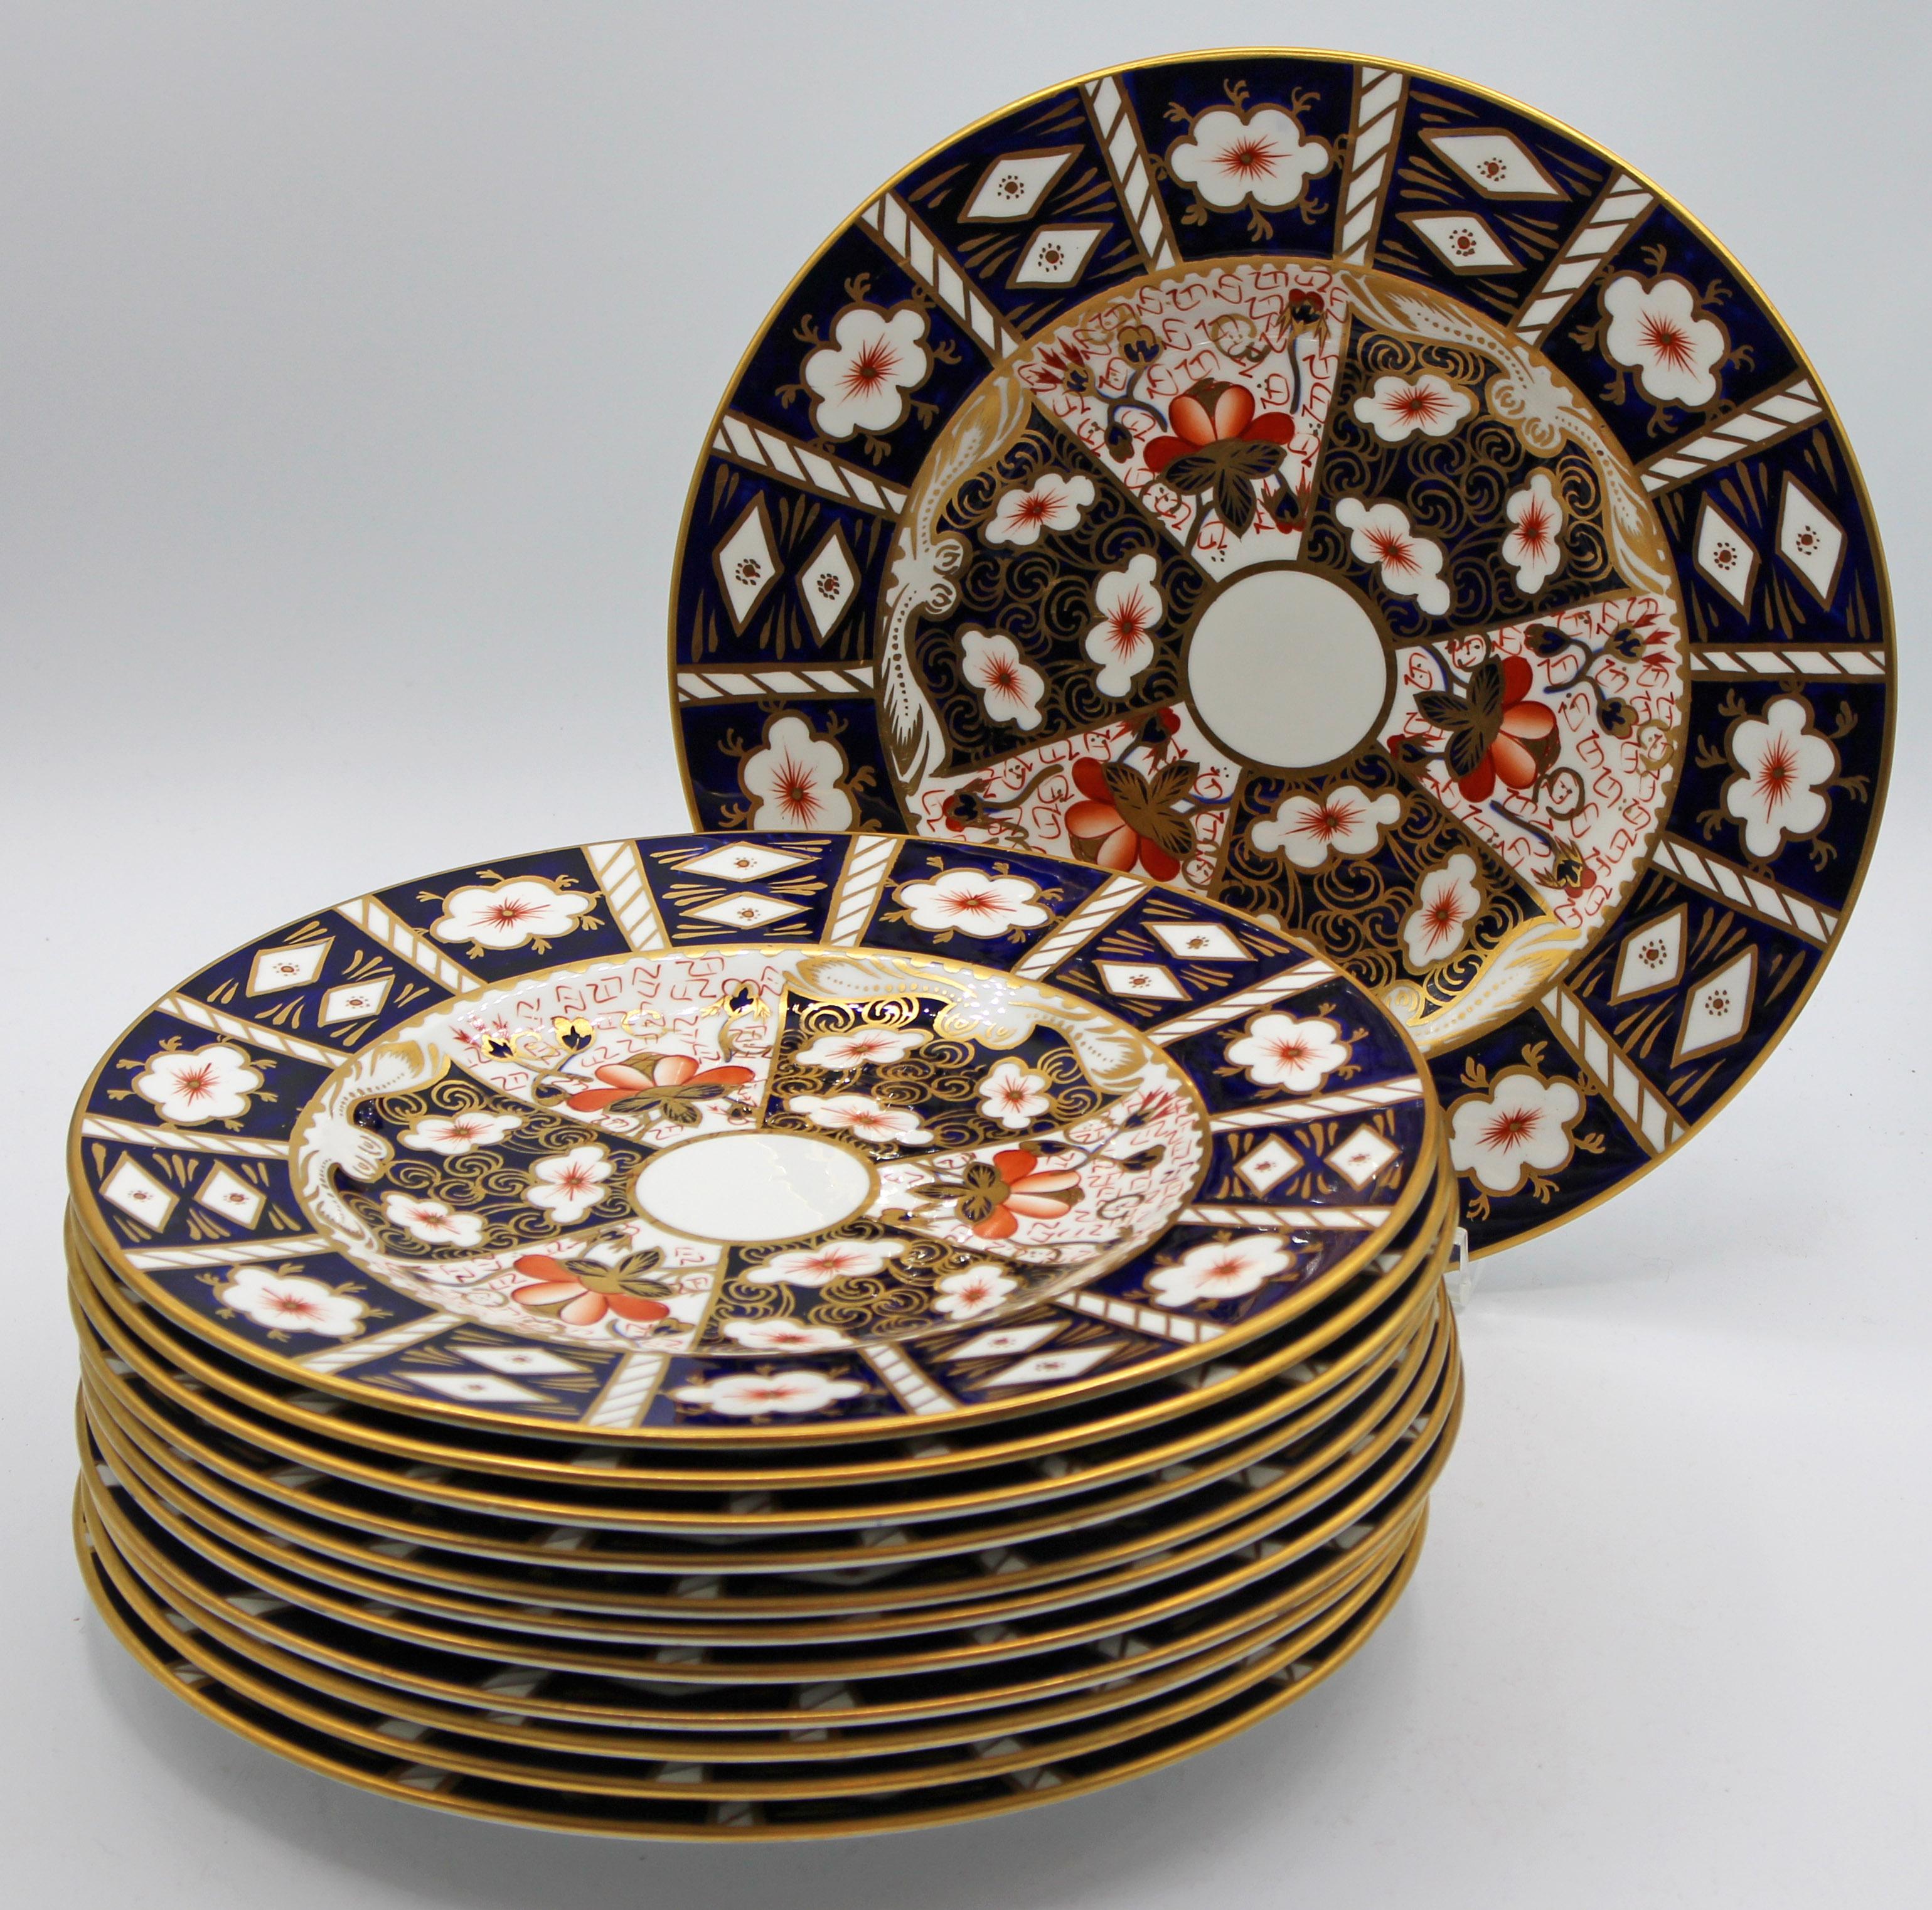 A set of 12 Royal Crown Derby dinner plates, Imari pattern 2451. Post 1976 mark. Hand painted and gilded. Discontinued pattern. 10 5/8